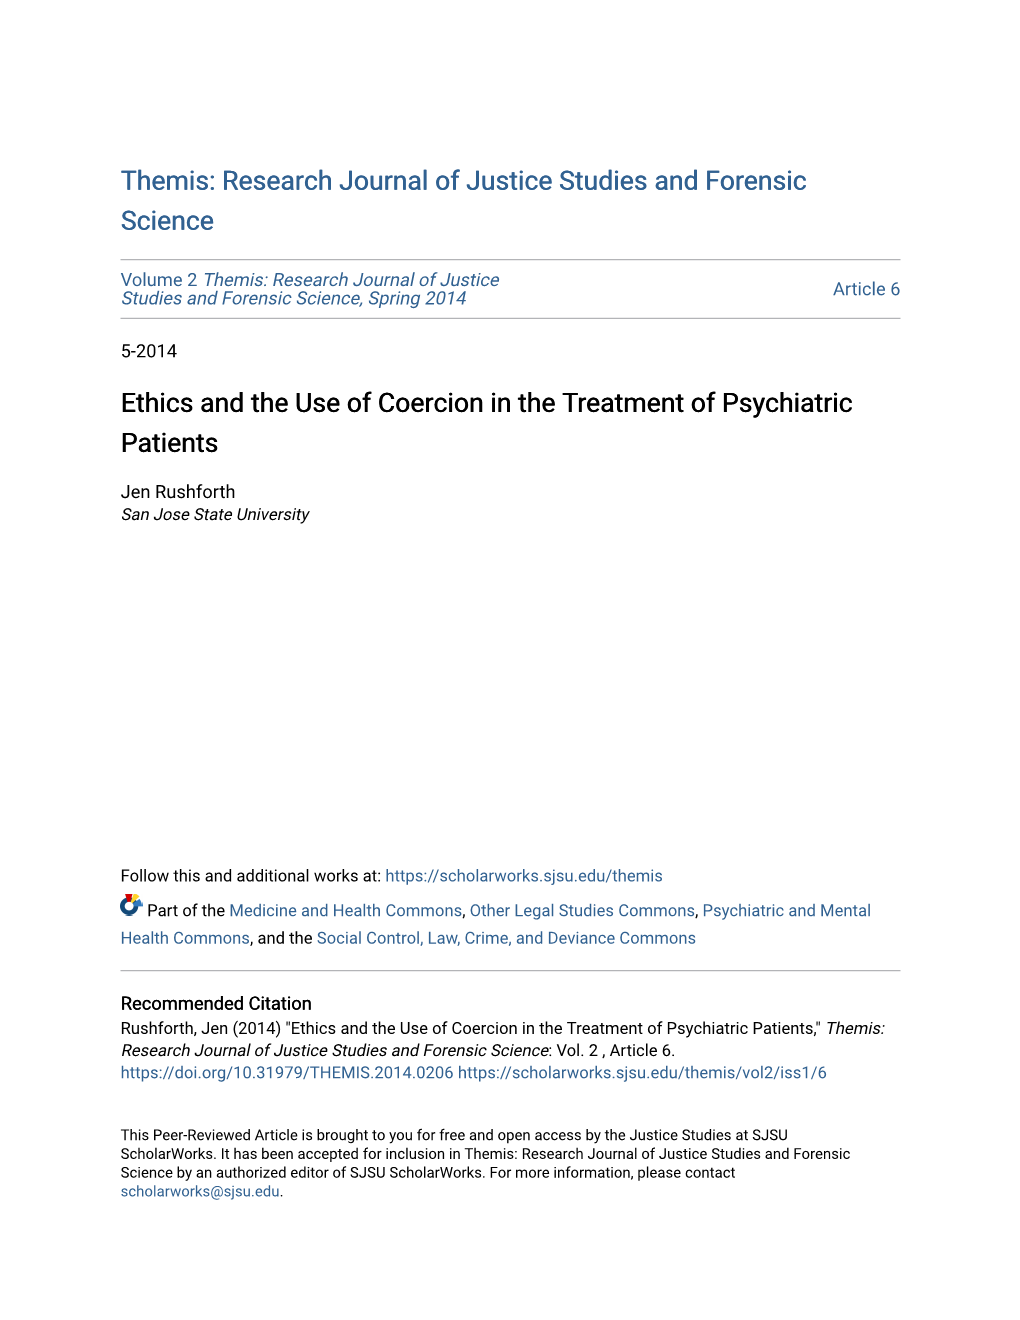 Ethics and the Use of Coercion in the Treatment of Psychiatric Patients